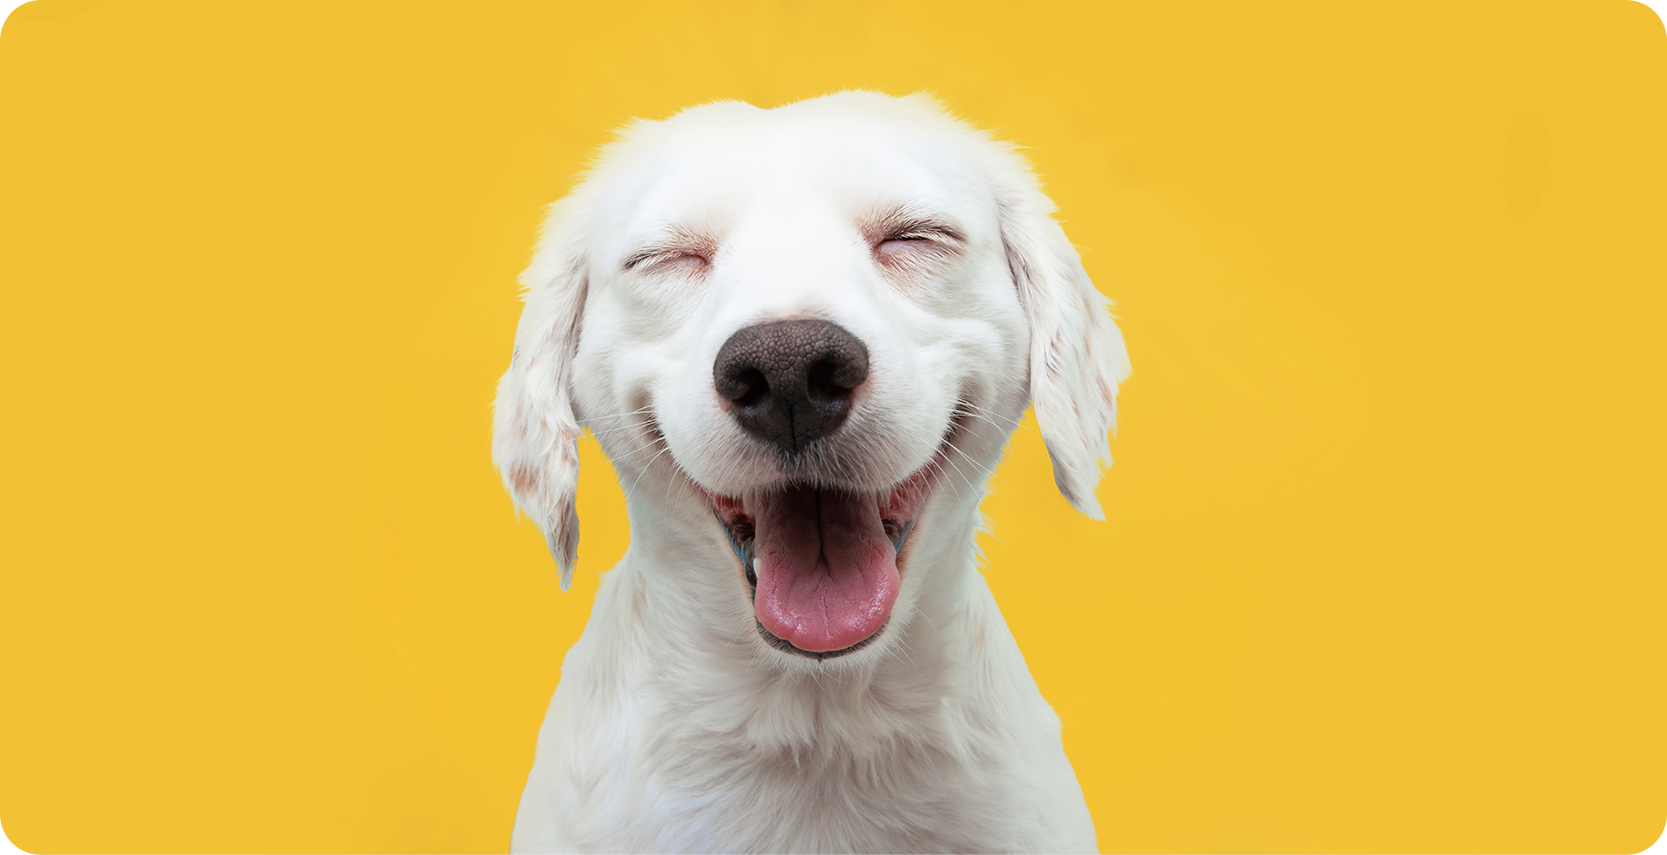 10 signs your dog is happy